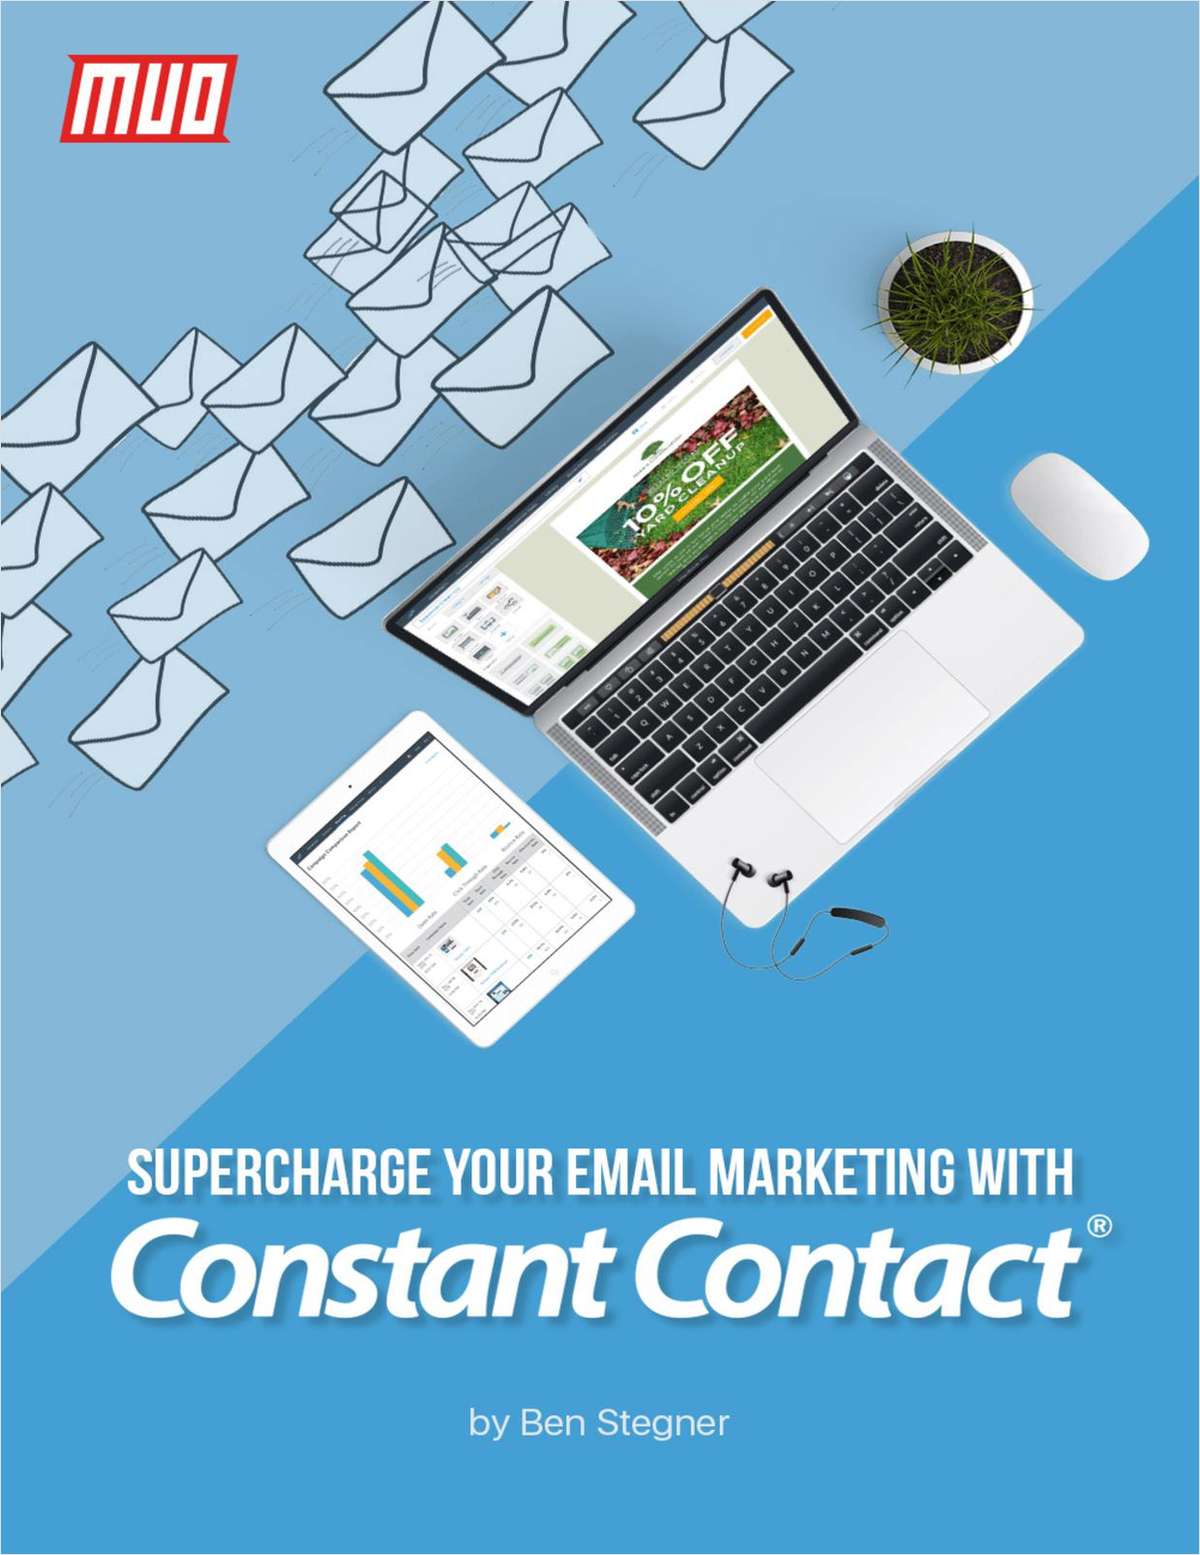 How to Supercharge Your Email Marketing With Constant Contact